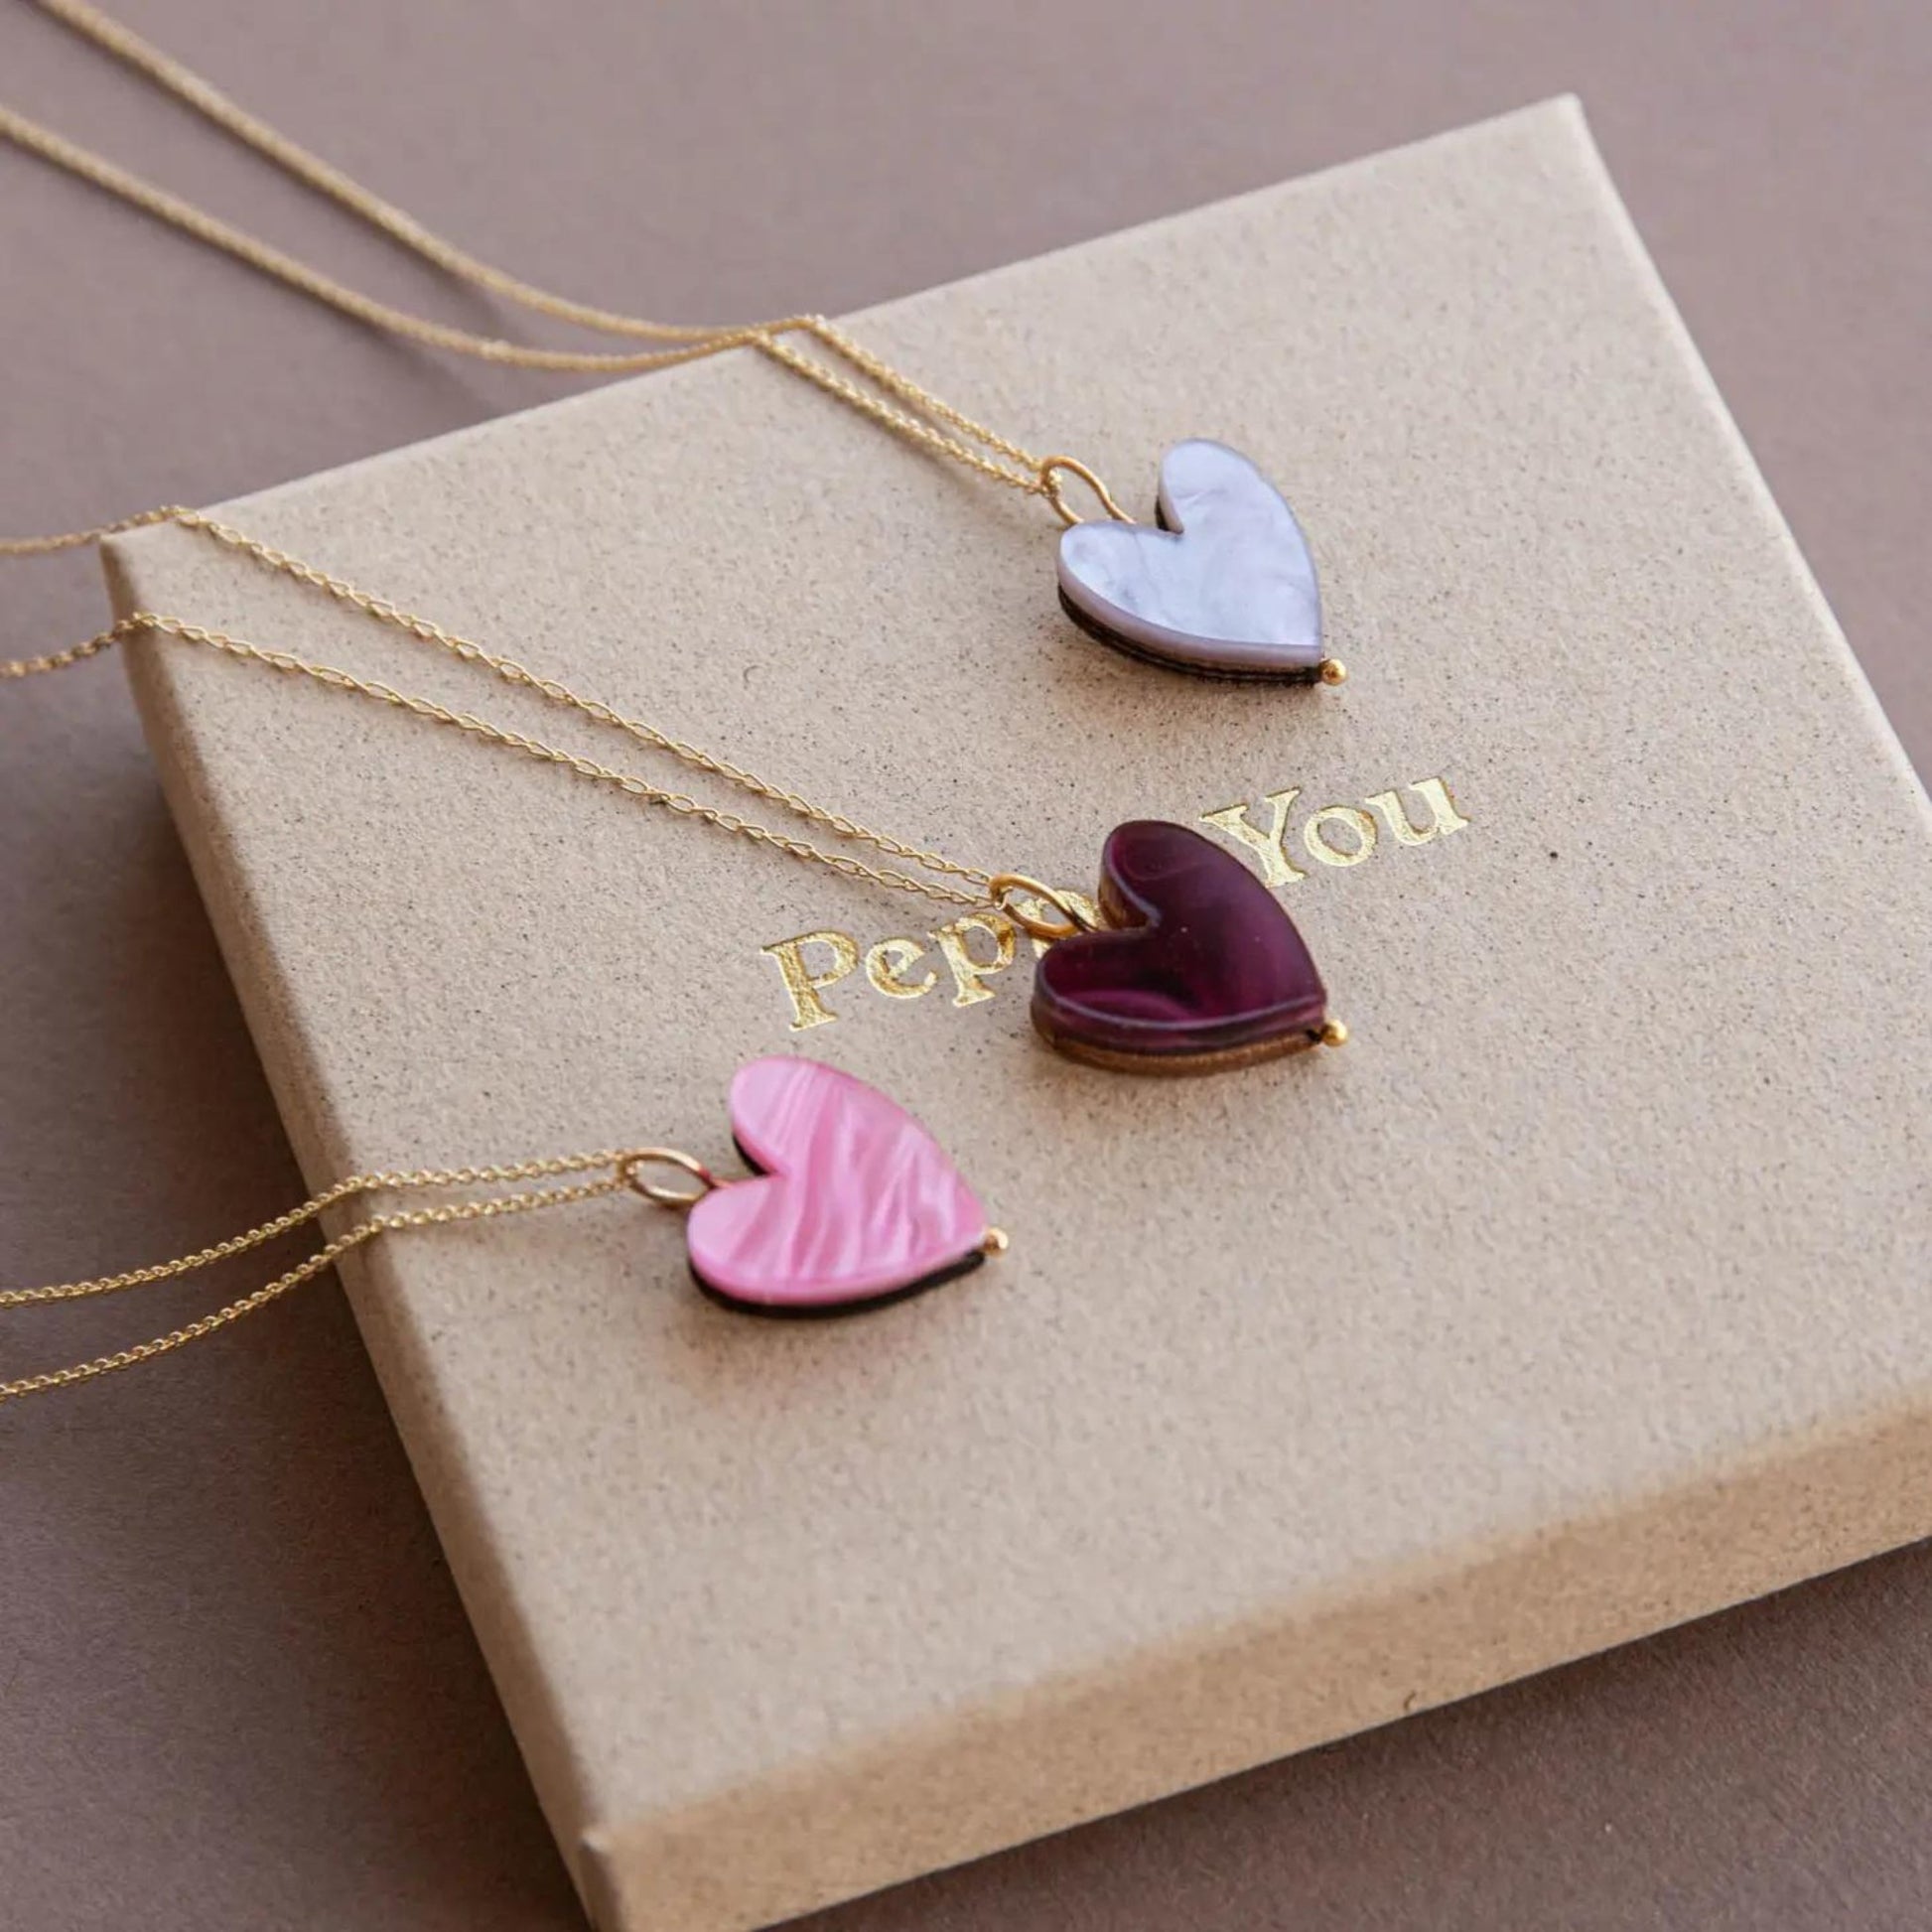 Love Grows Gold Necklace: Merlot Red Marble - The Little Jewellery Company